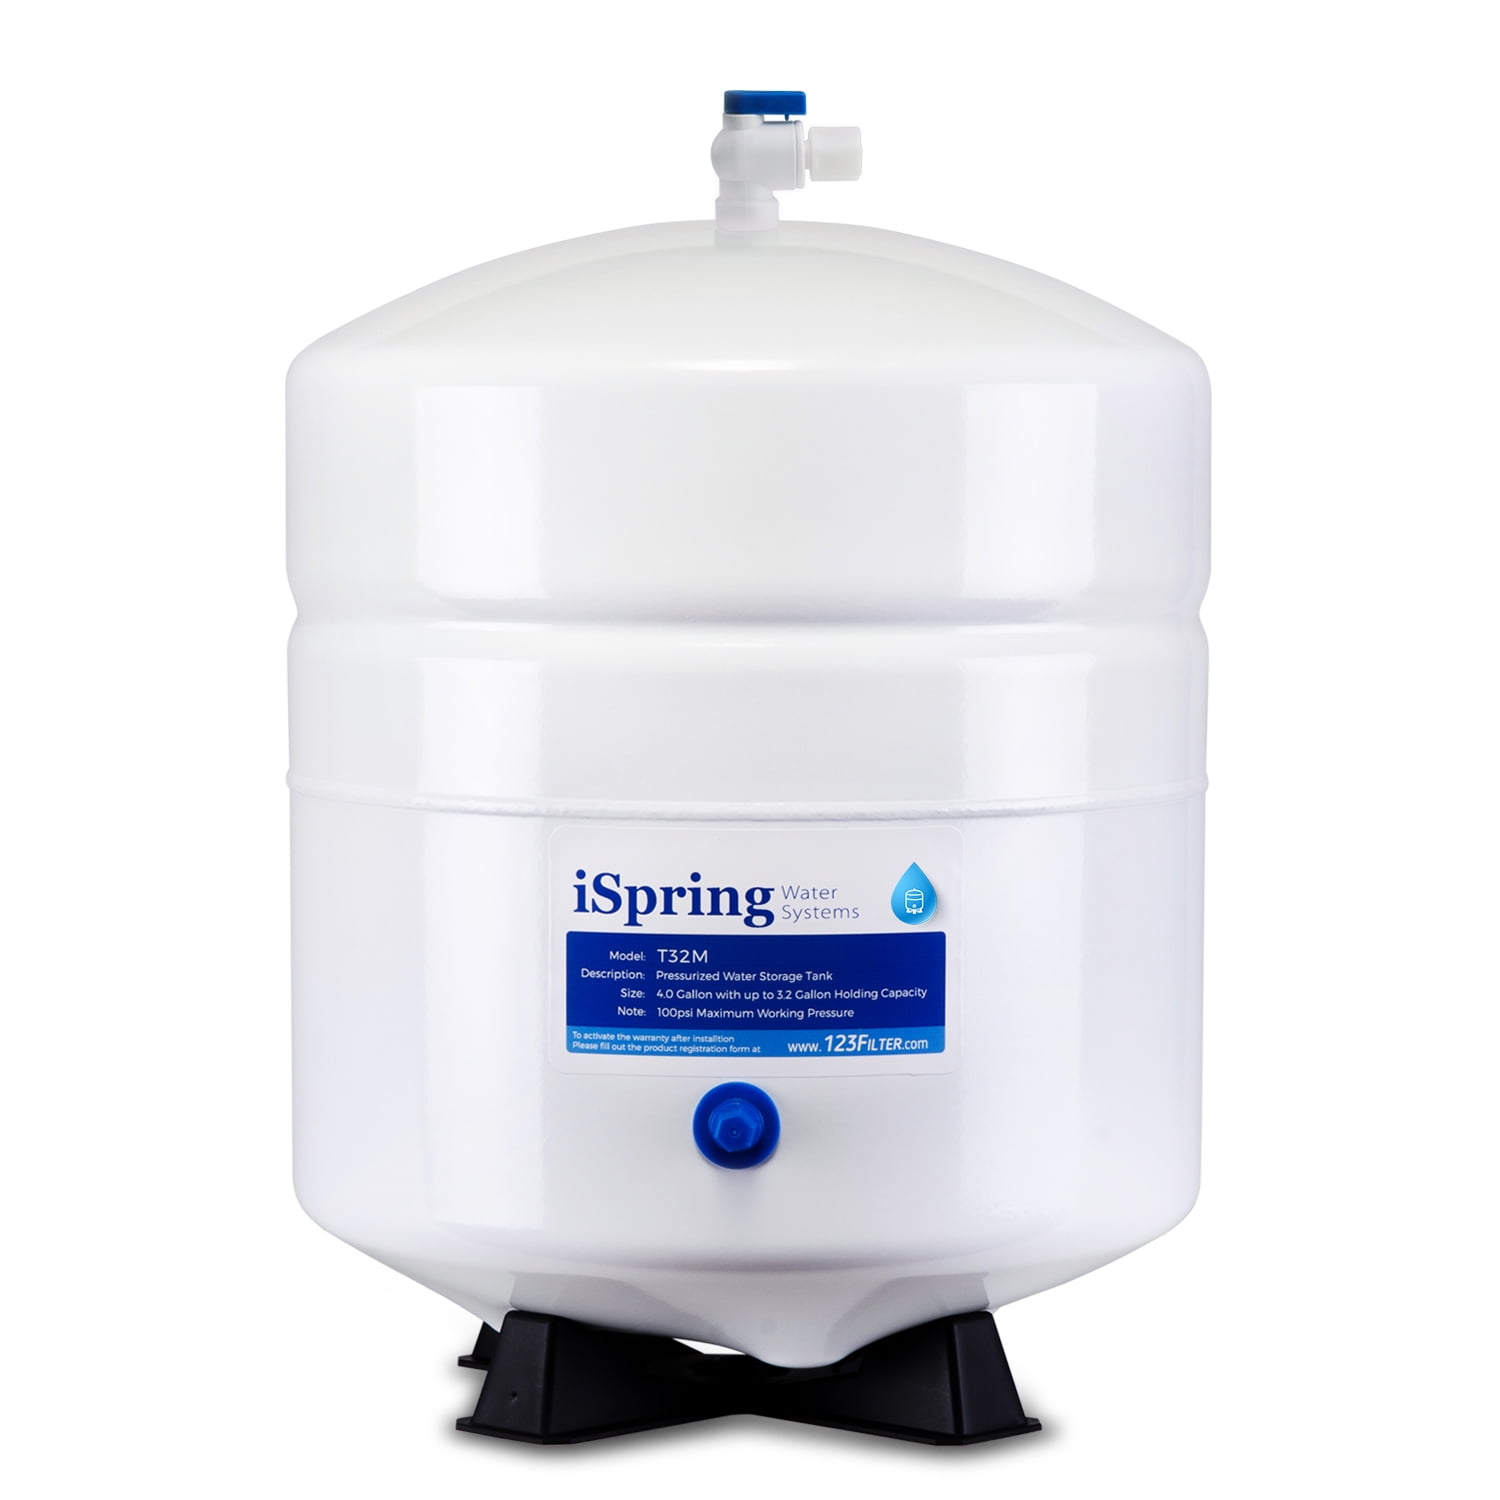 Emergency Water Storage 5 Gallon Water Tanks - 2 Tanks - 5 Gallons ea. w/Lids + Spigot - Food Grade, Portable - Survival Supply Water Container